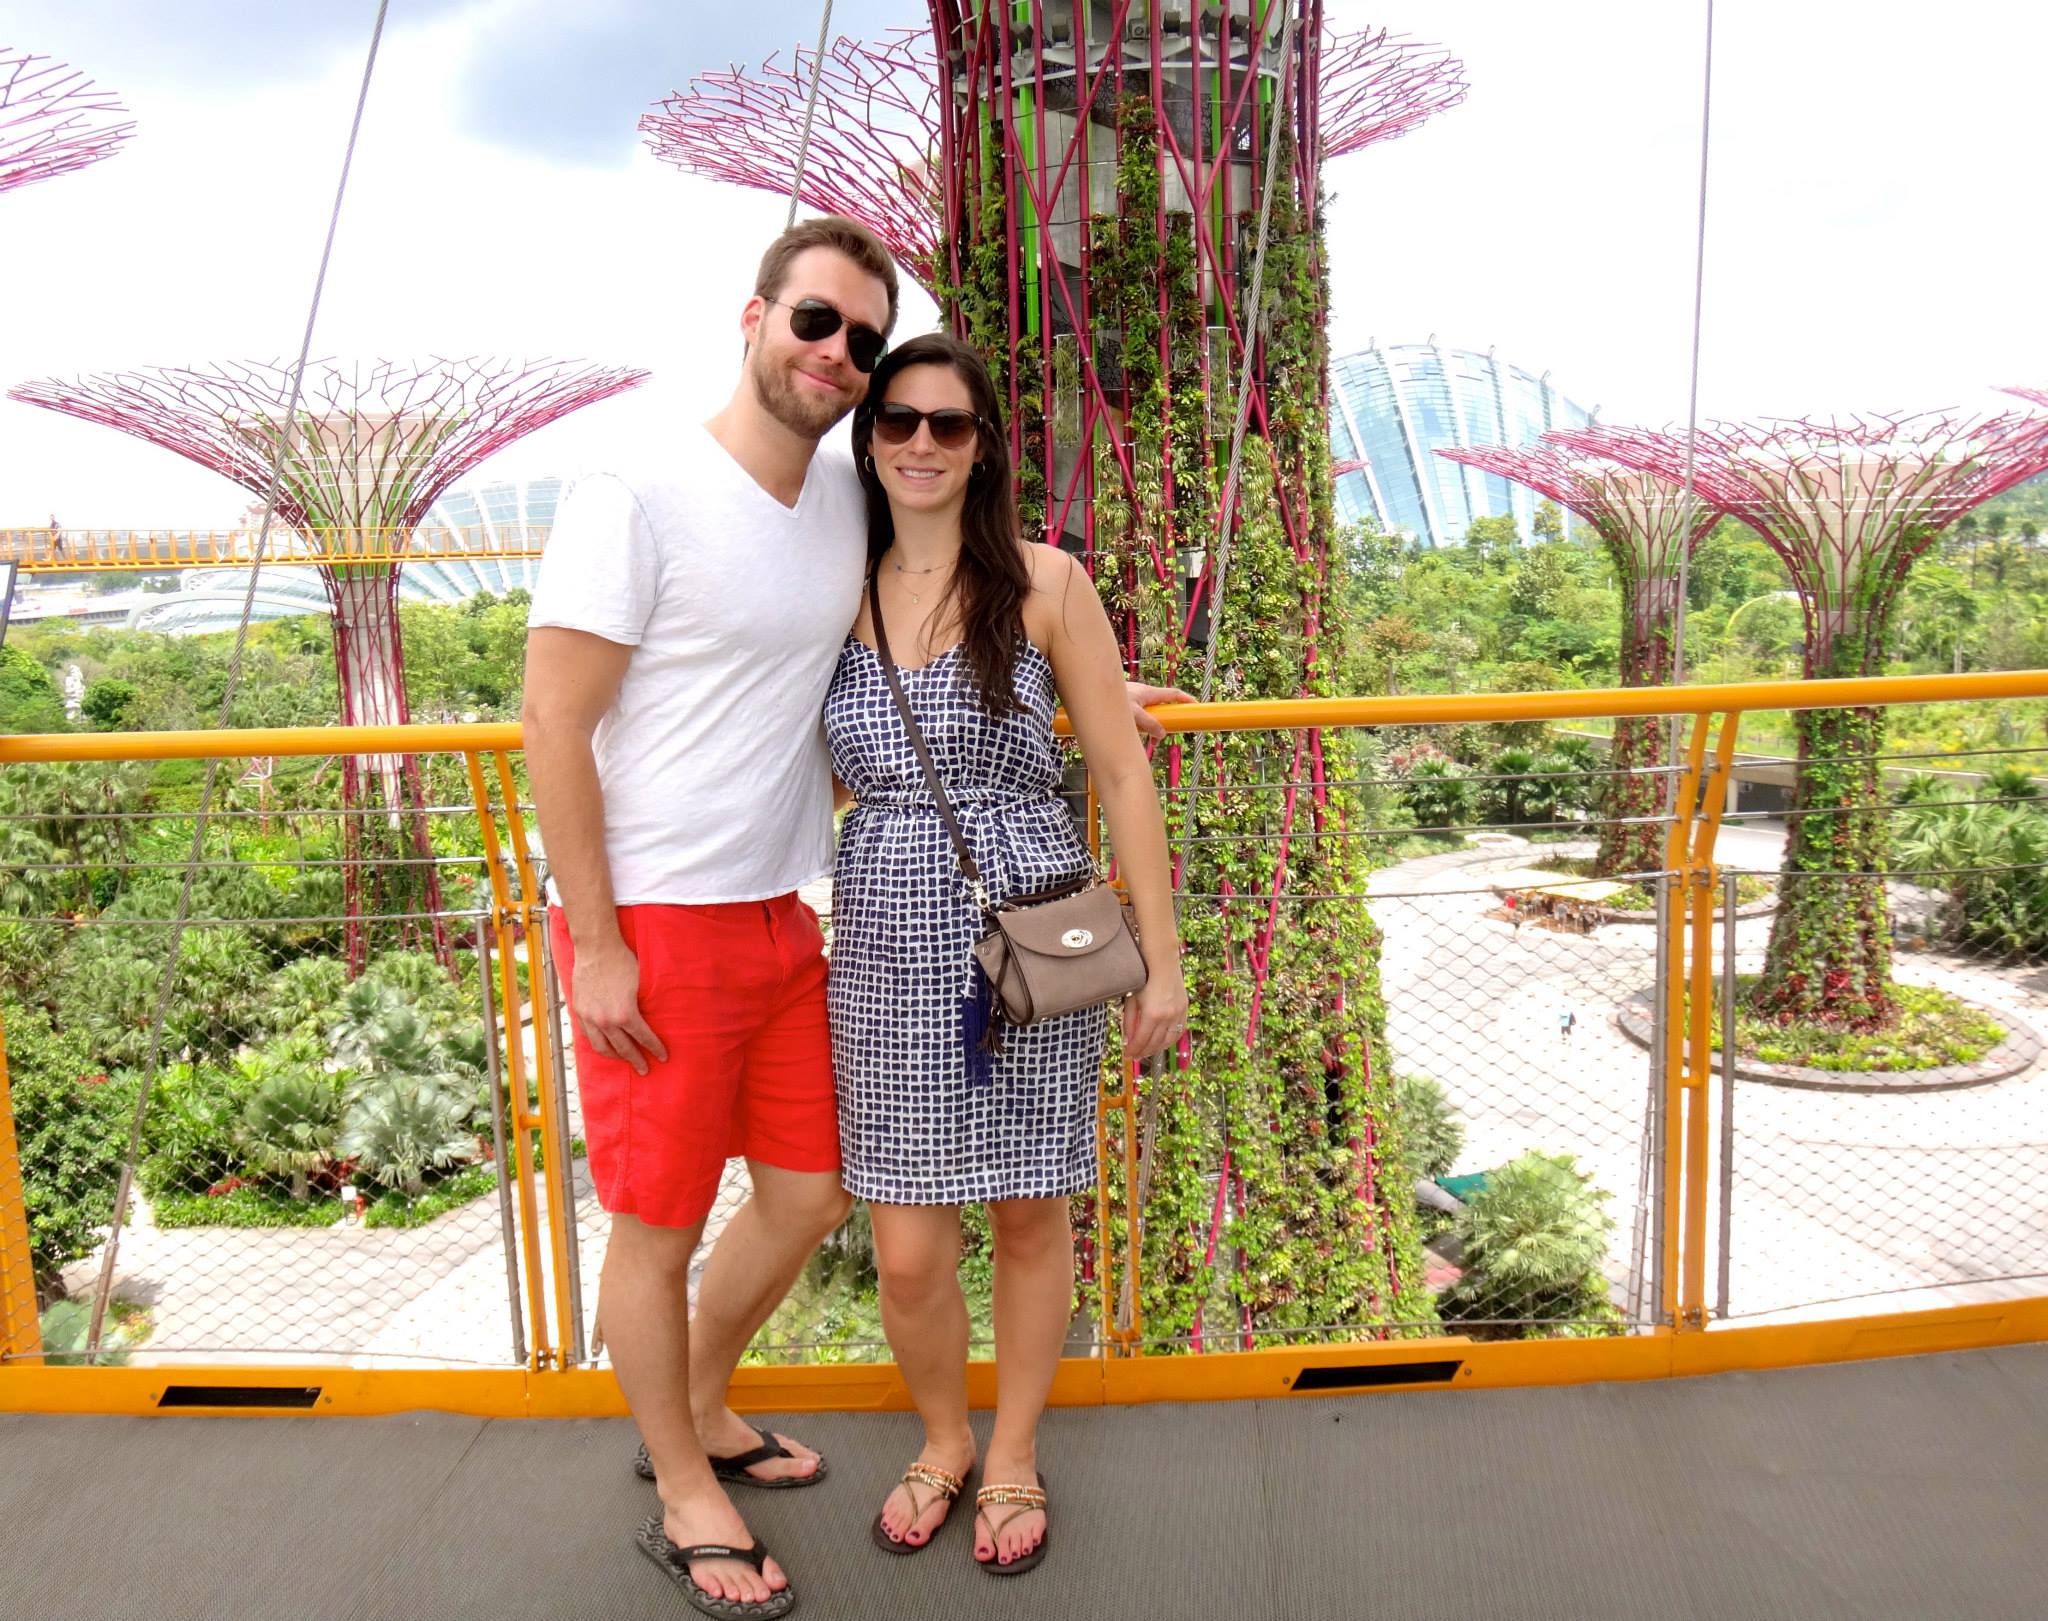 48hrs in Singapore Itinerary - Gardens by the bay